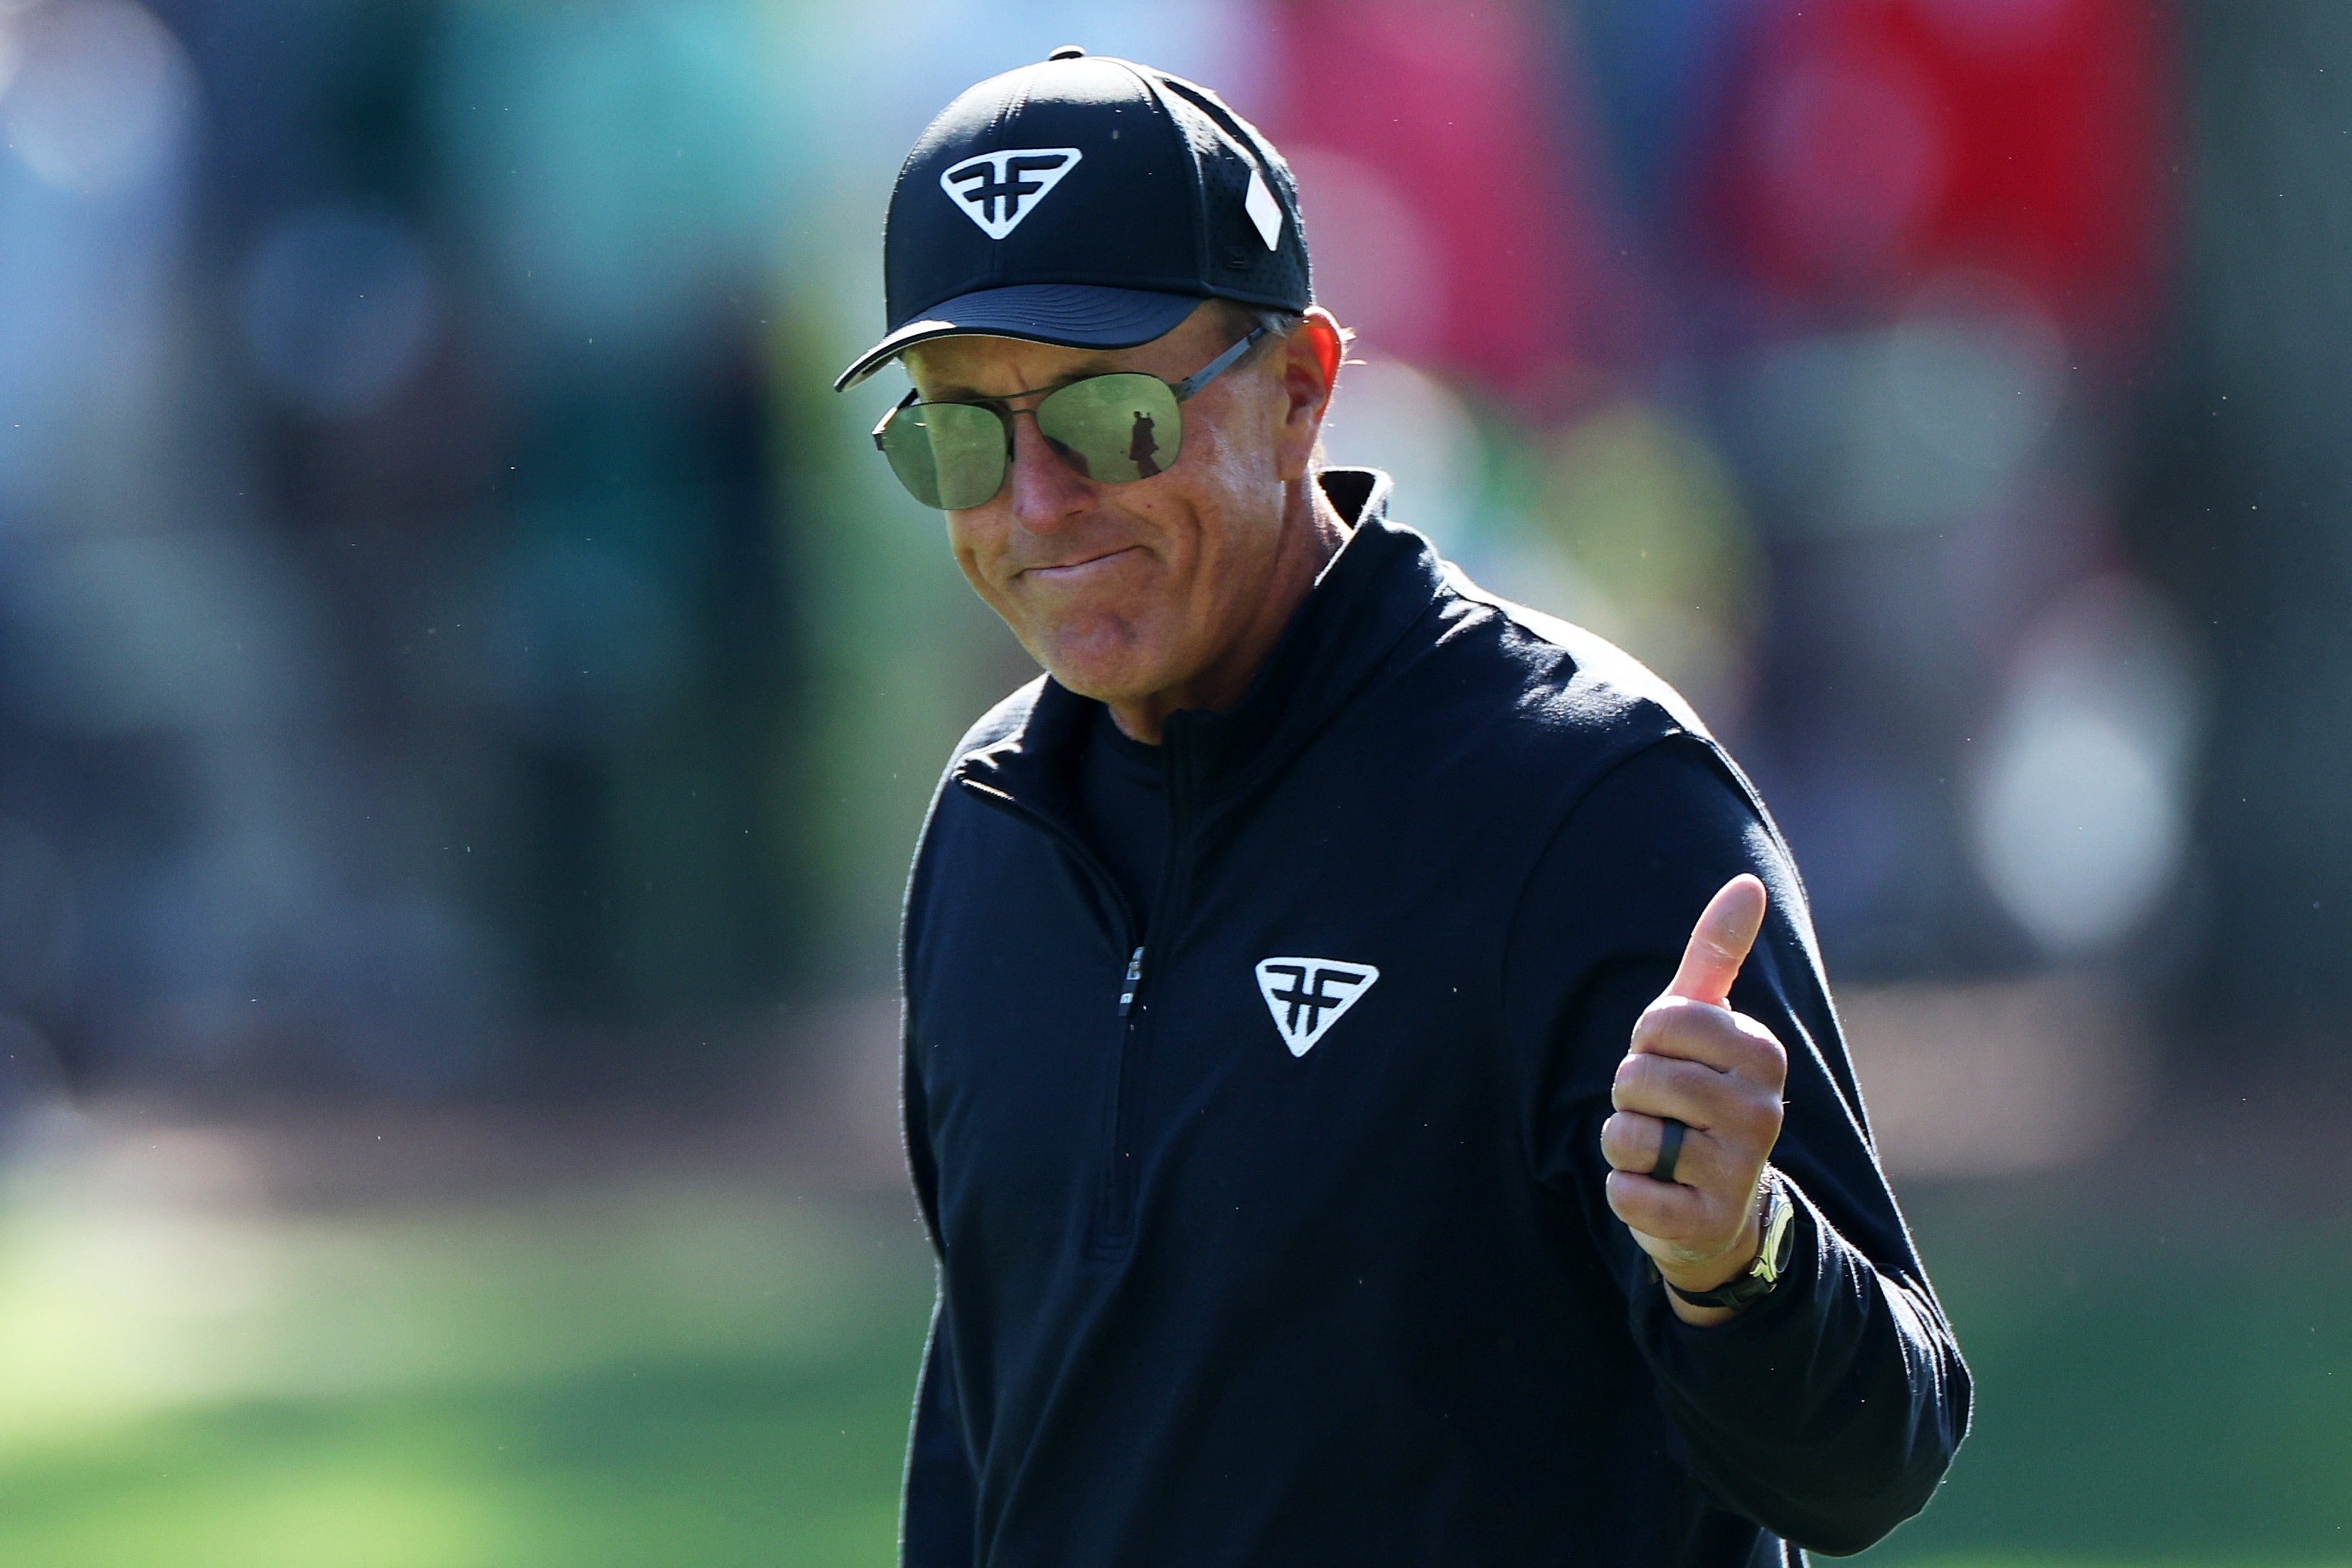 Phil Mickelson swept aside recent controversies to post a brilliant final round of 65